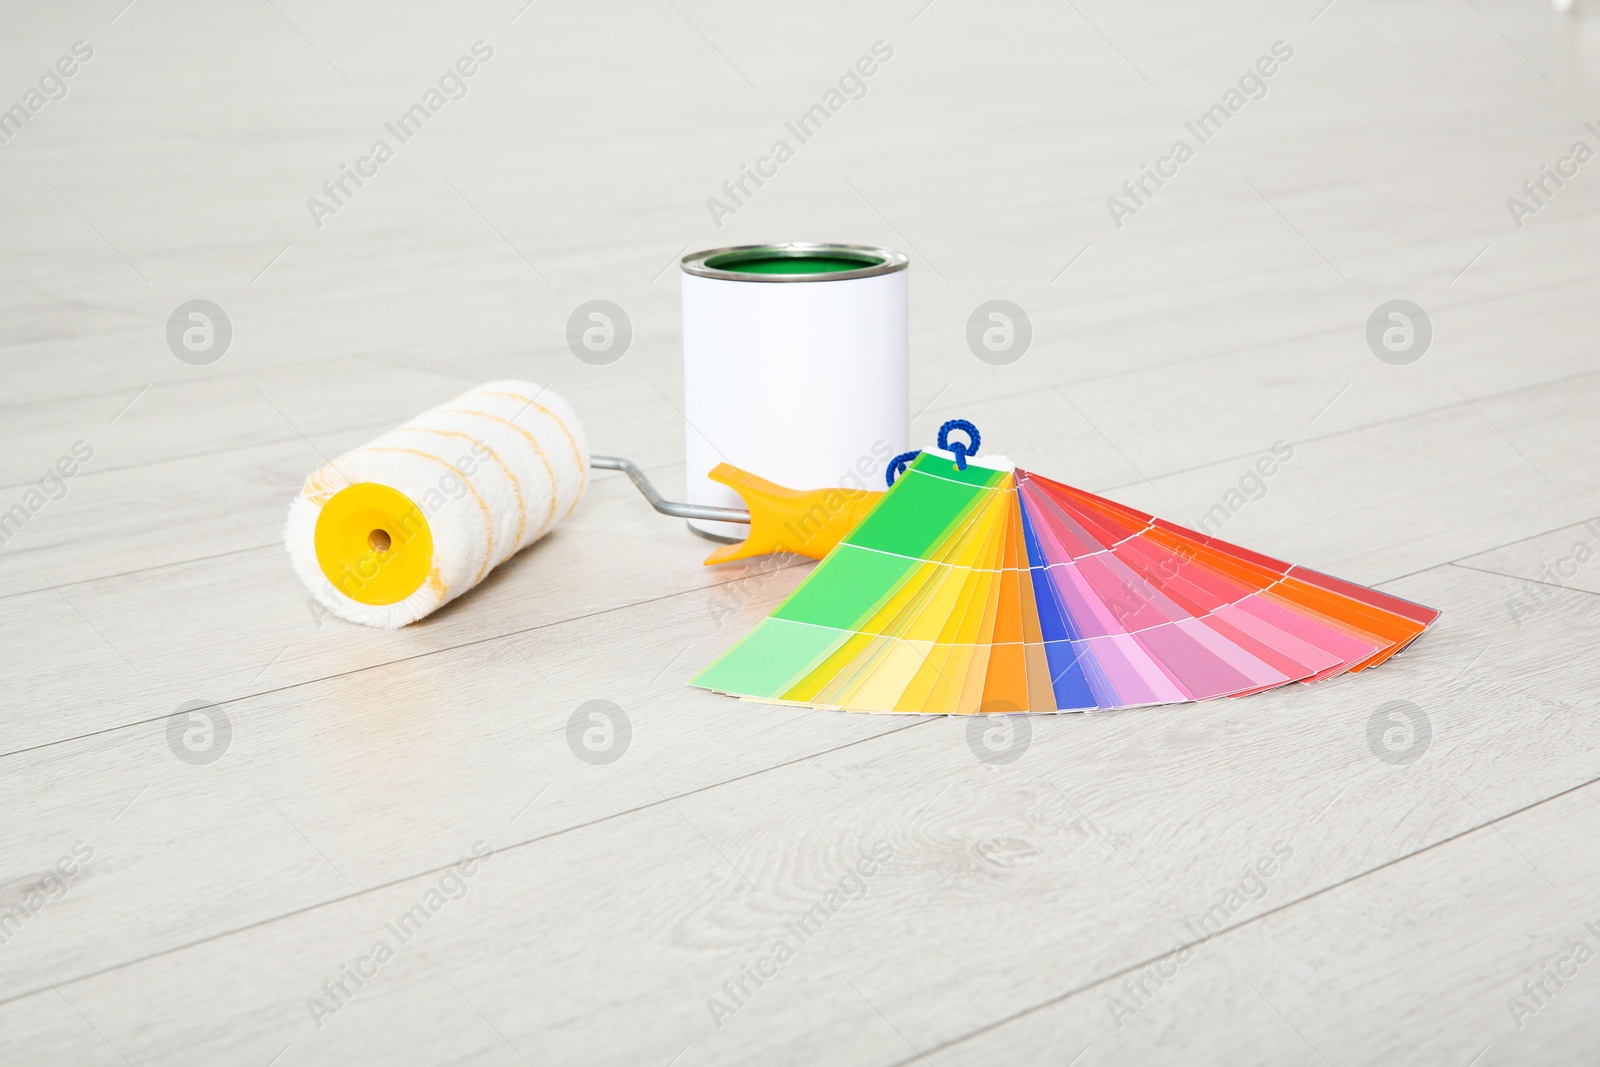 Photo of Can of paint, roller brush and color palette on wooden floor indoors